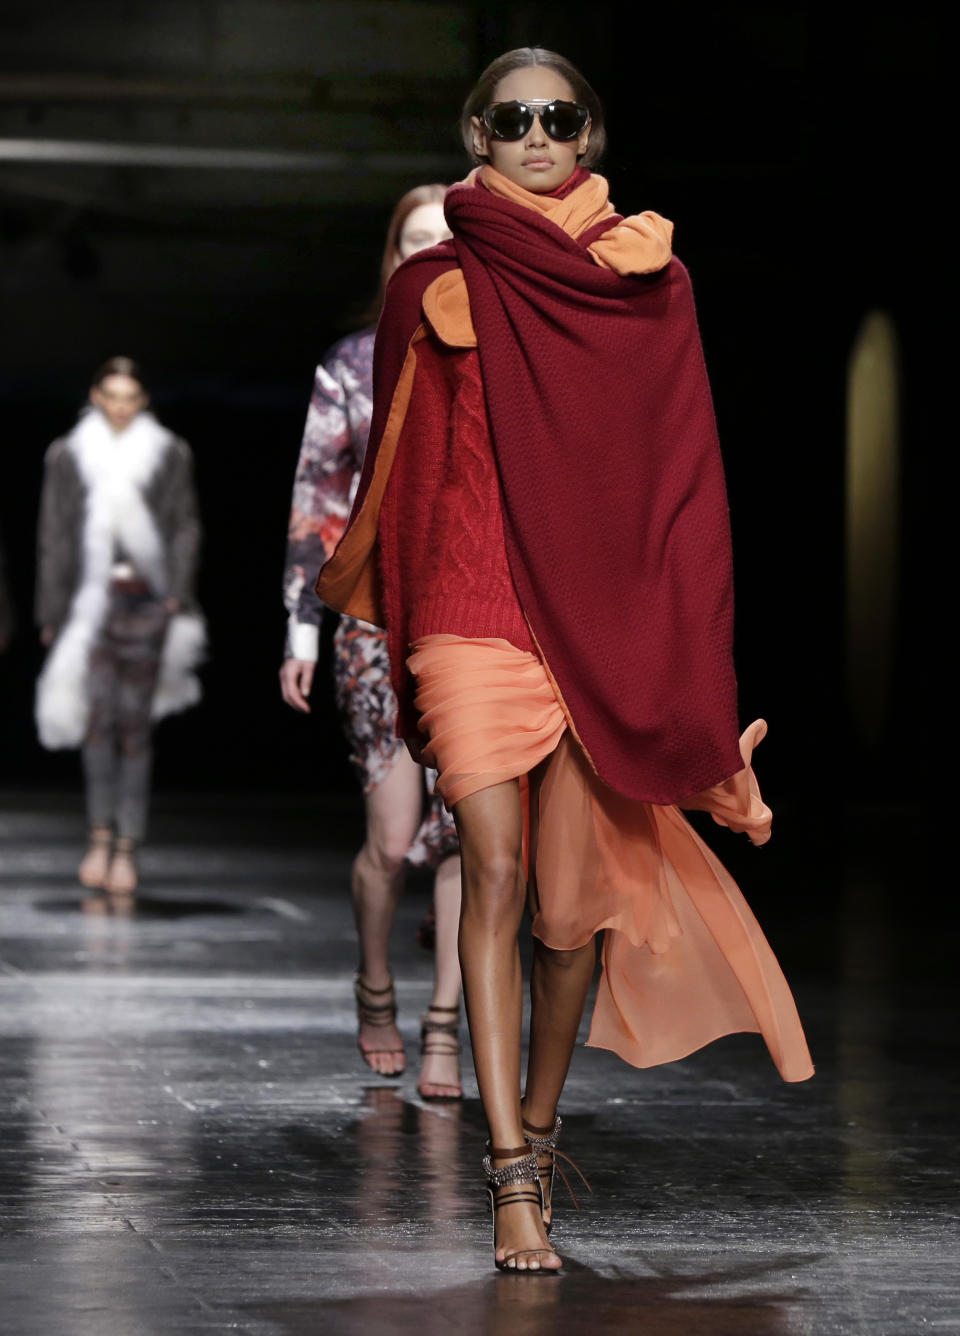 The Prabal Gurung Fall 2014 collection is modeled during Fashion Week in New York, Saturday, Feb. 8, 2014. (AP Photo/Richard Drew)